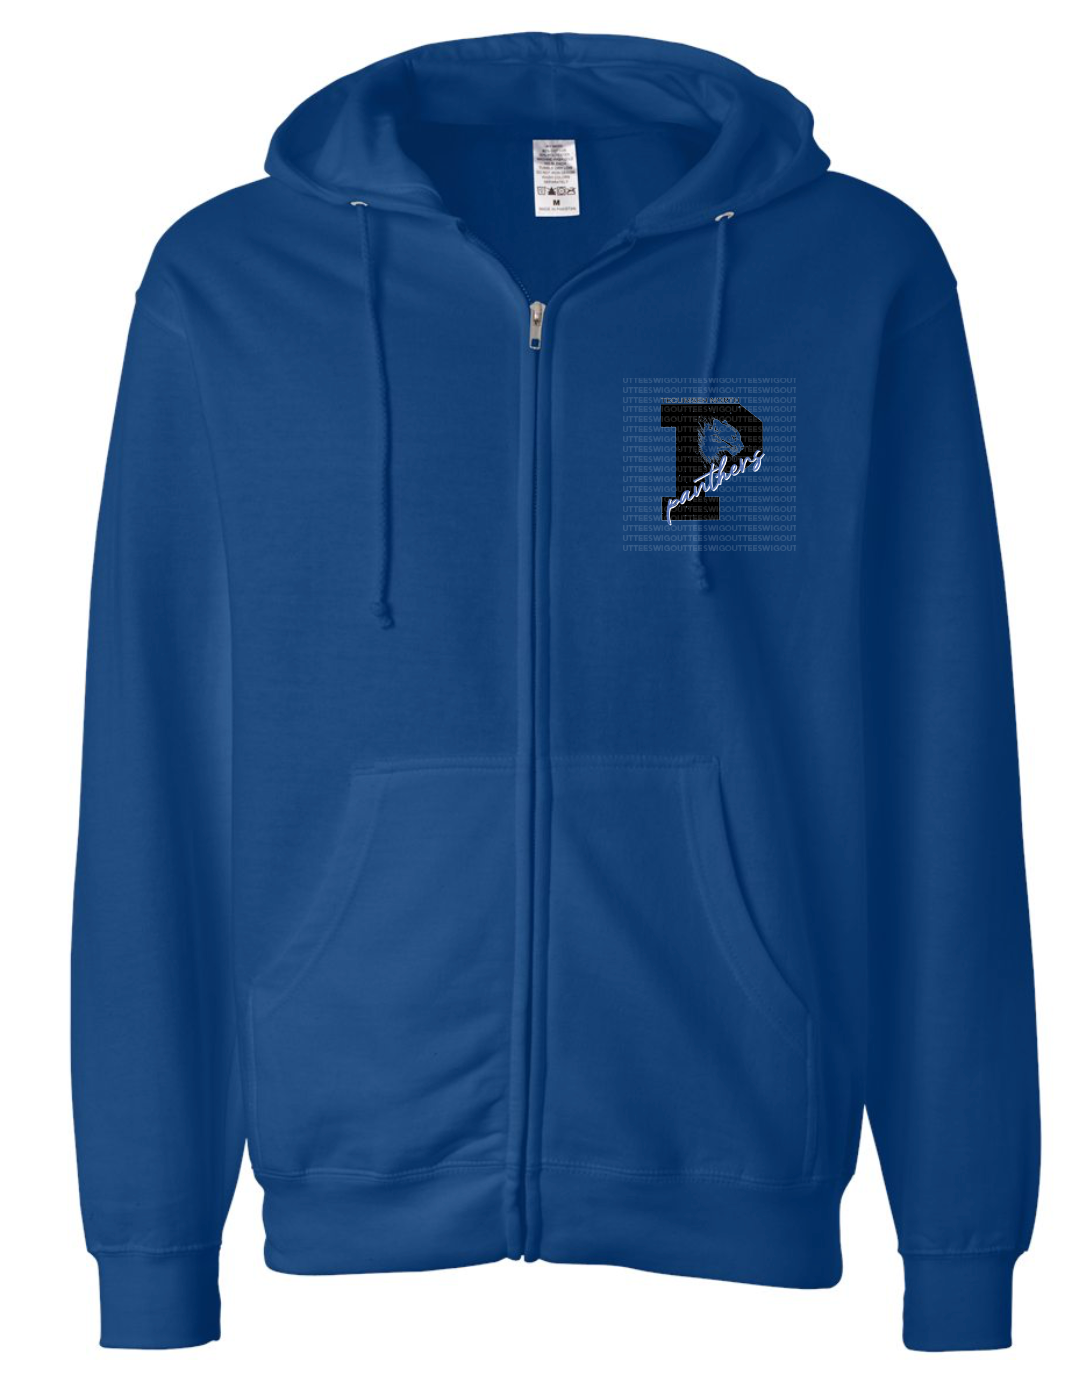 P is for Panthers Midweight Full-Zip Hoodie